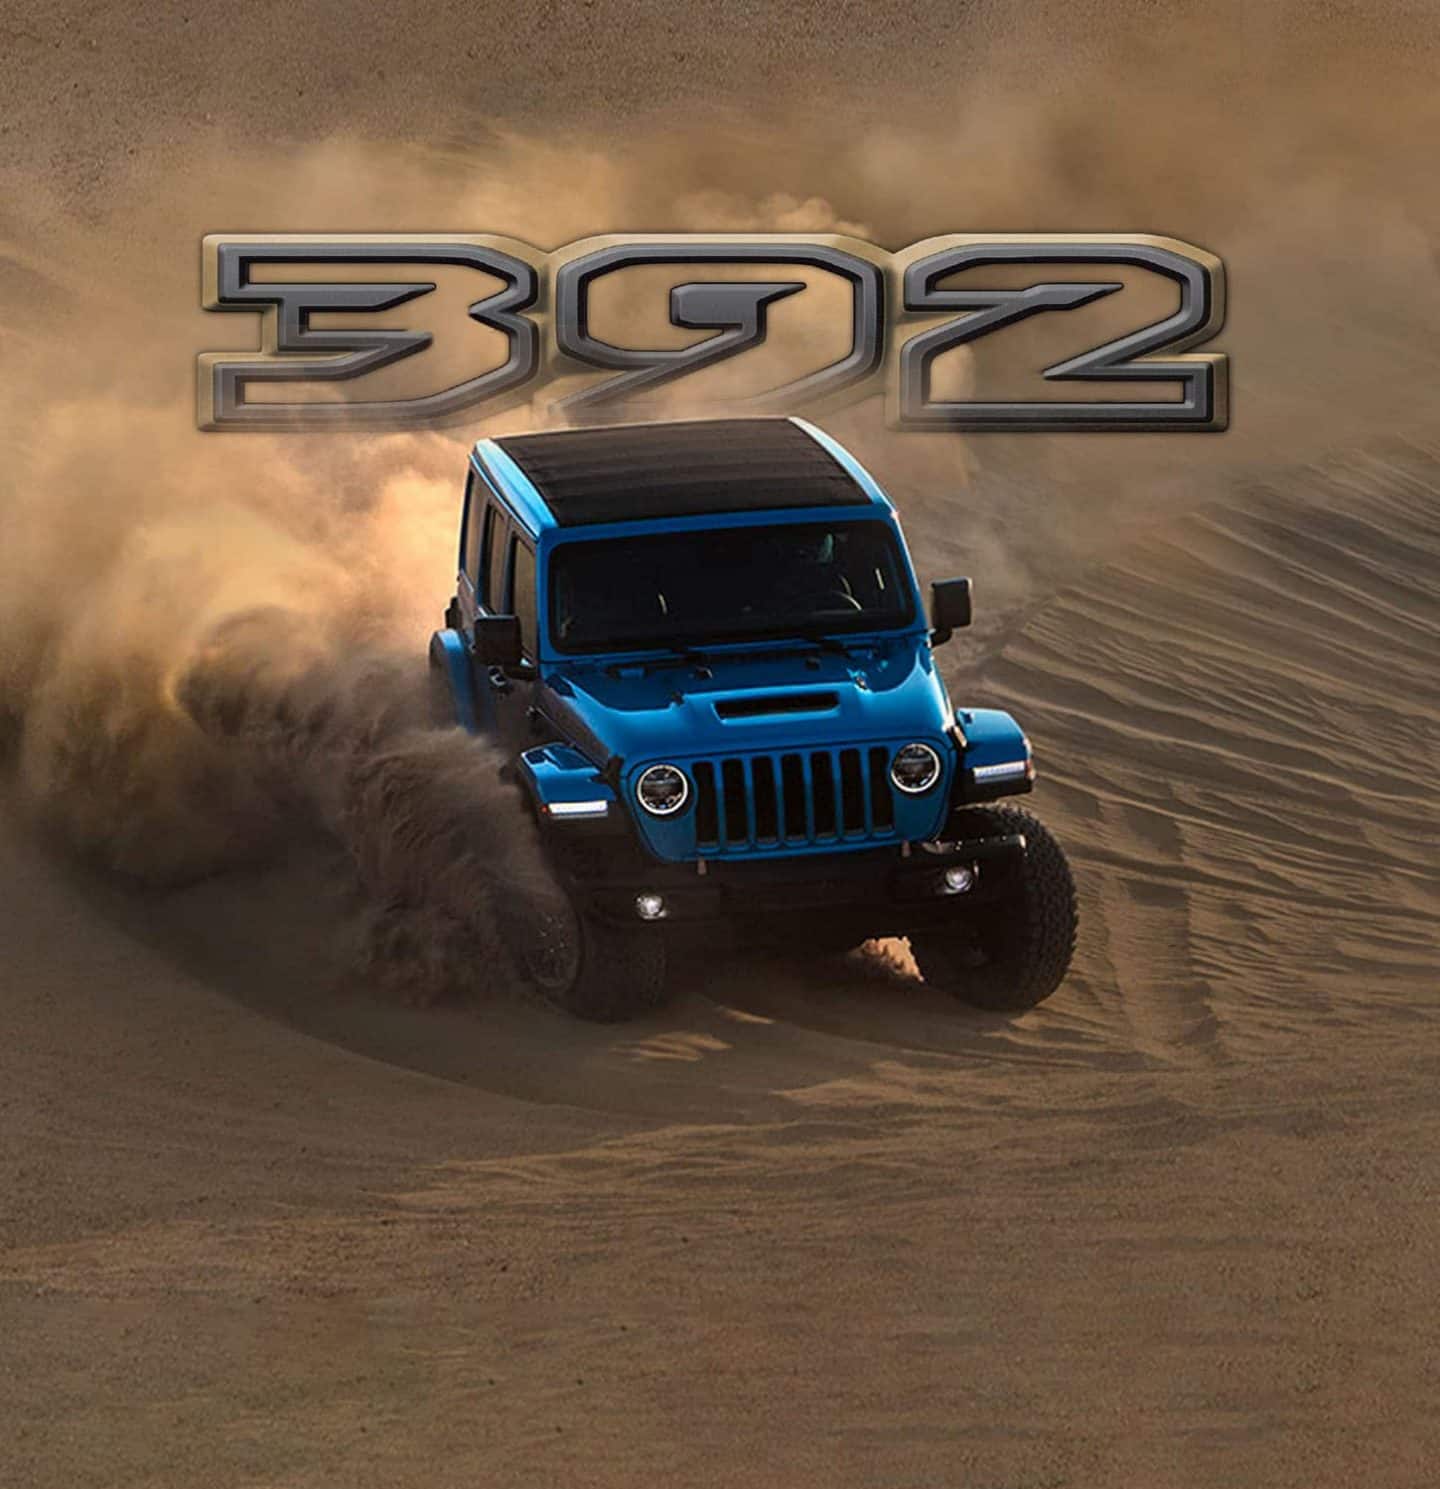 392. The 2023 Jeep Wrangler Rubicon 392 being driven on a sand dune with a cloud of dust obscuring its wheels.